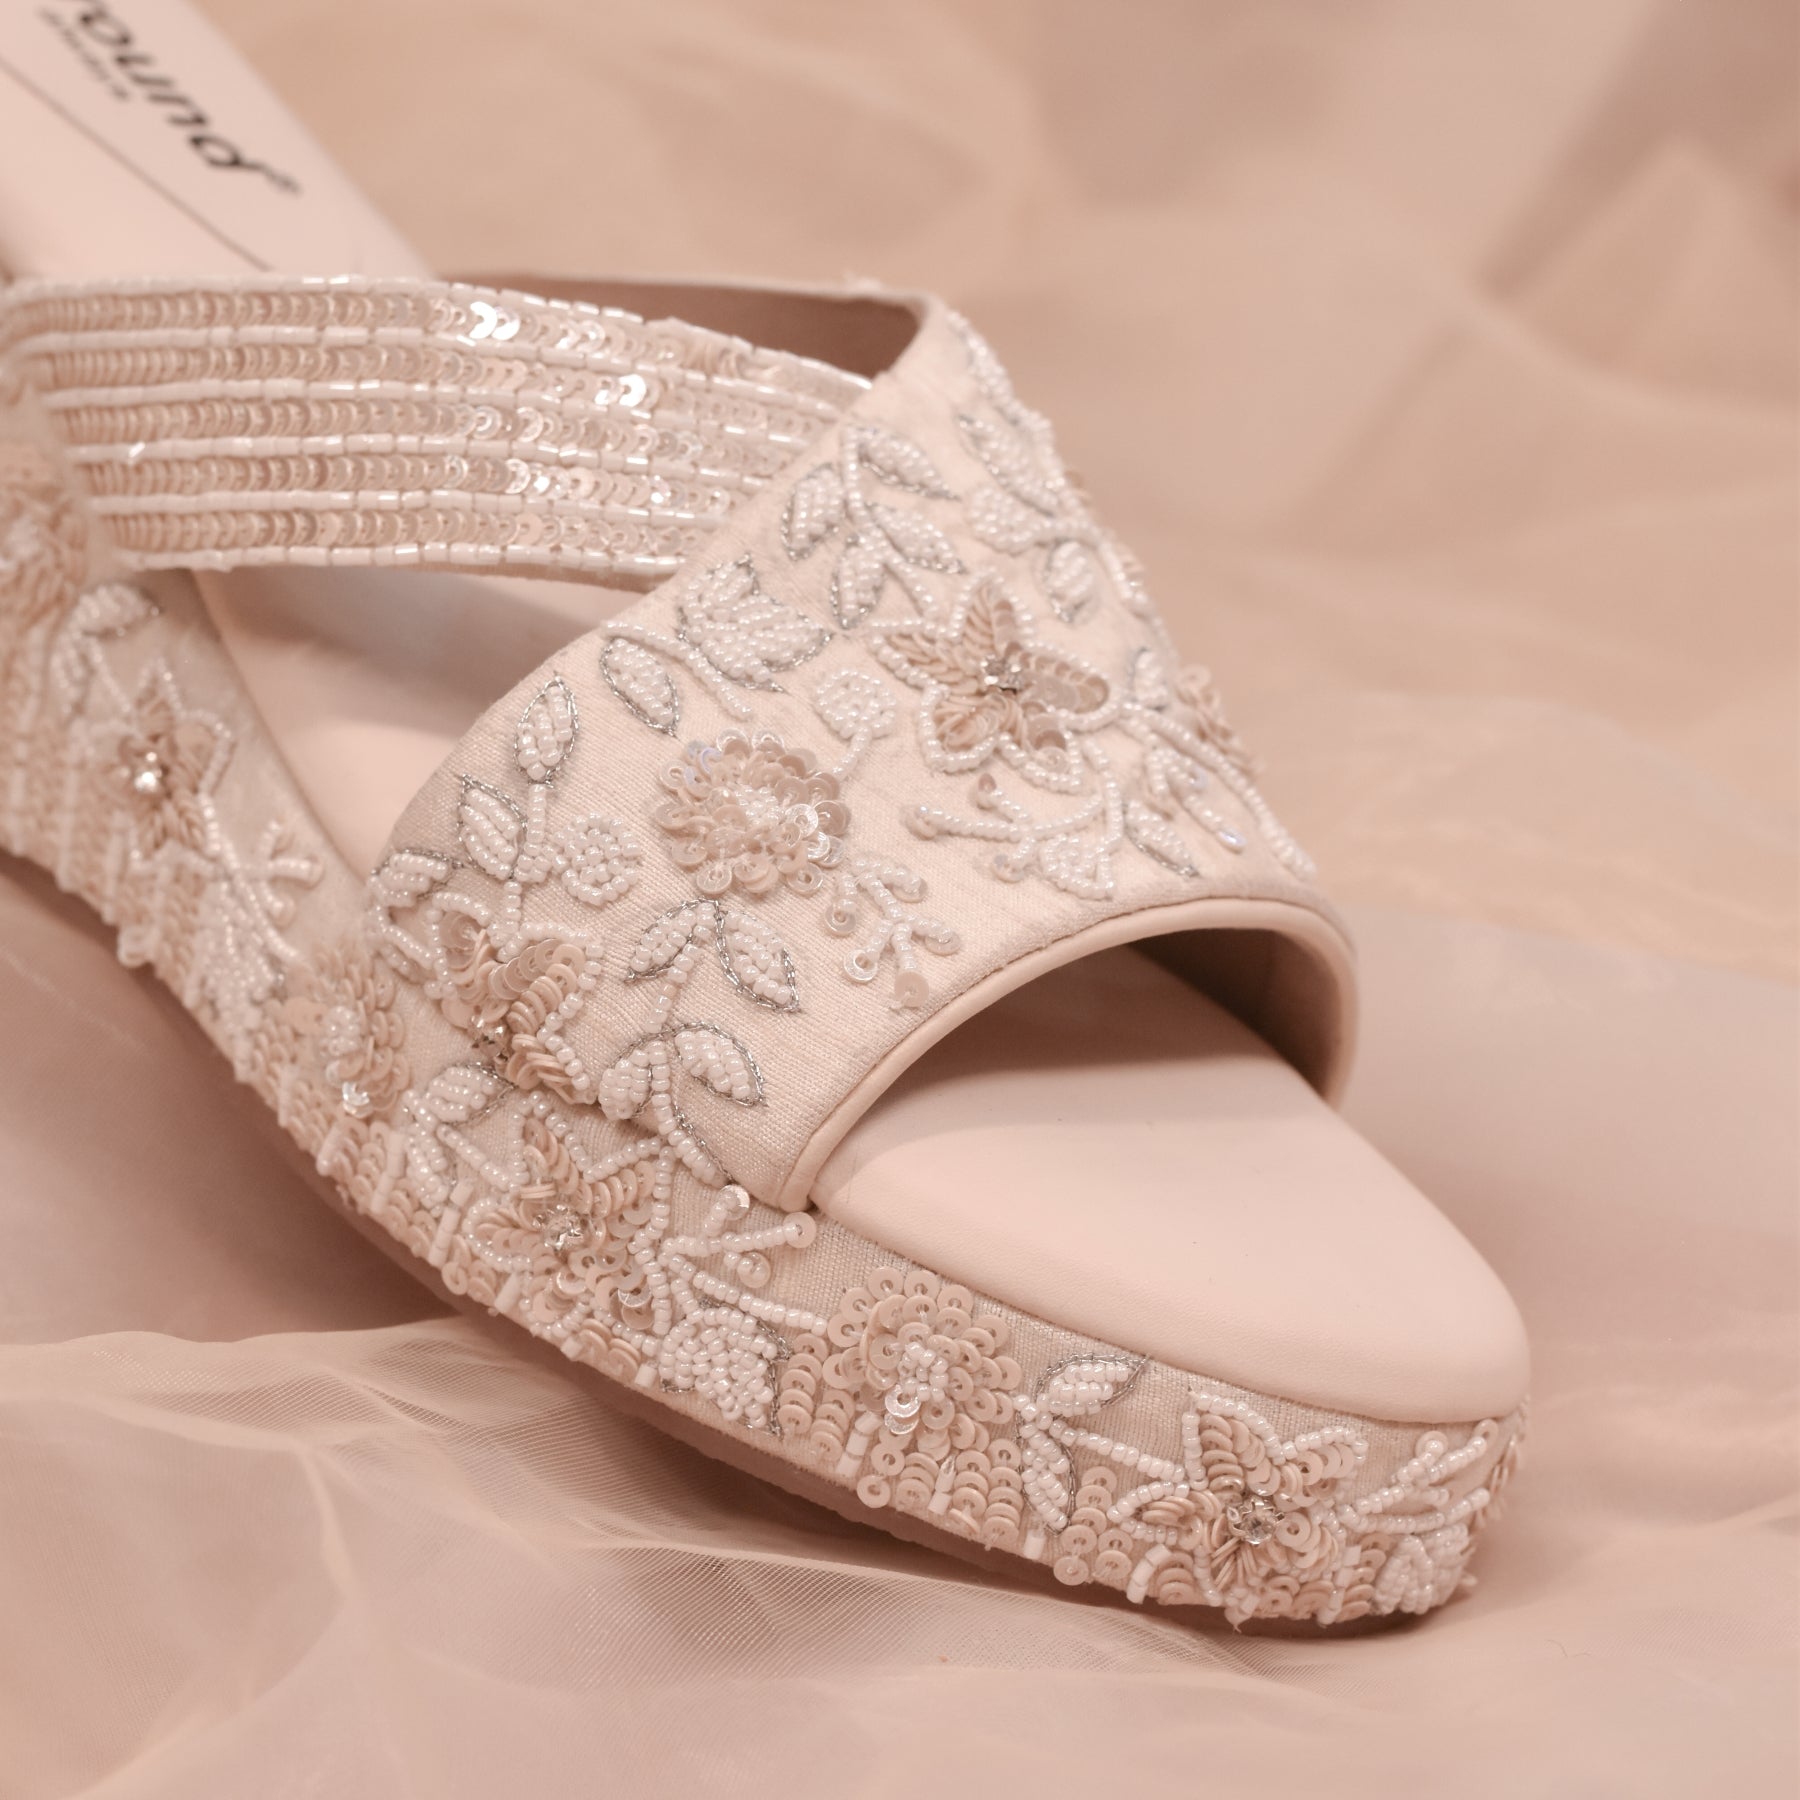 Premium Christian Wedding Shoes with Global Shipping